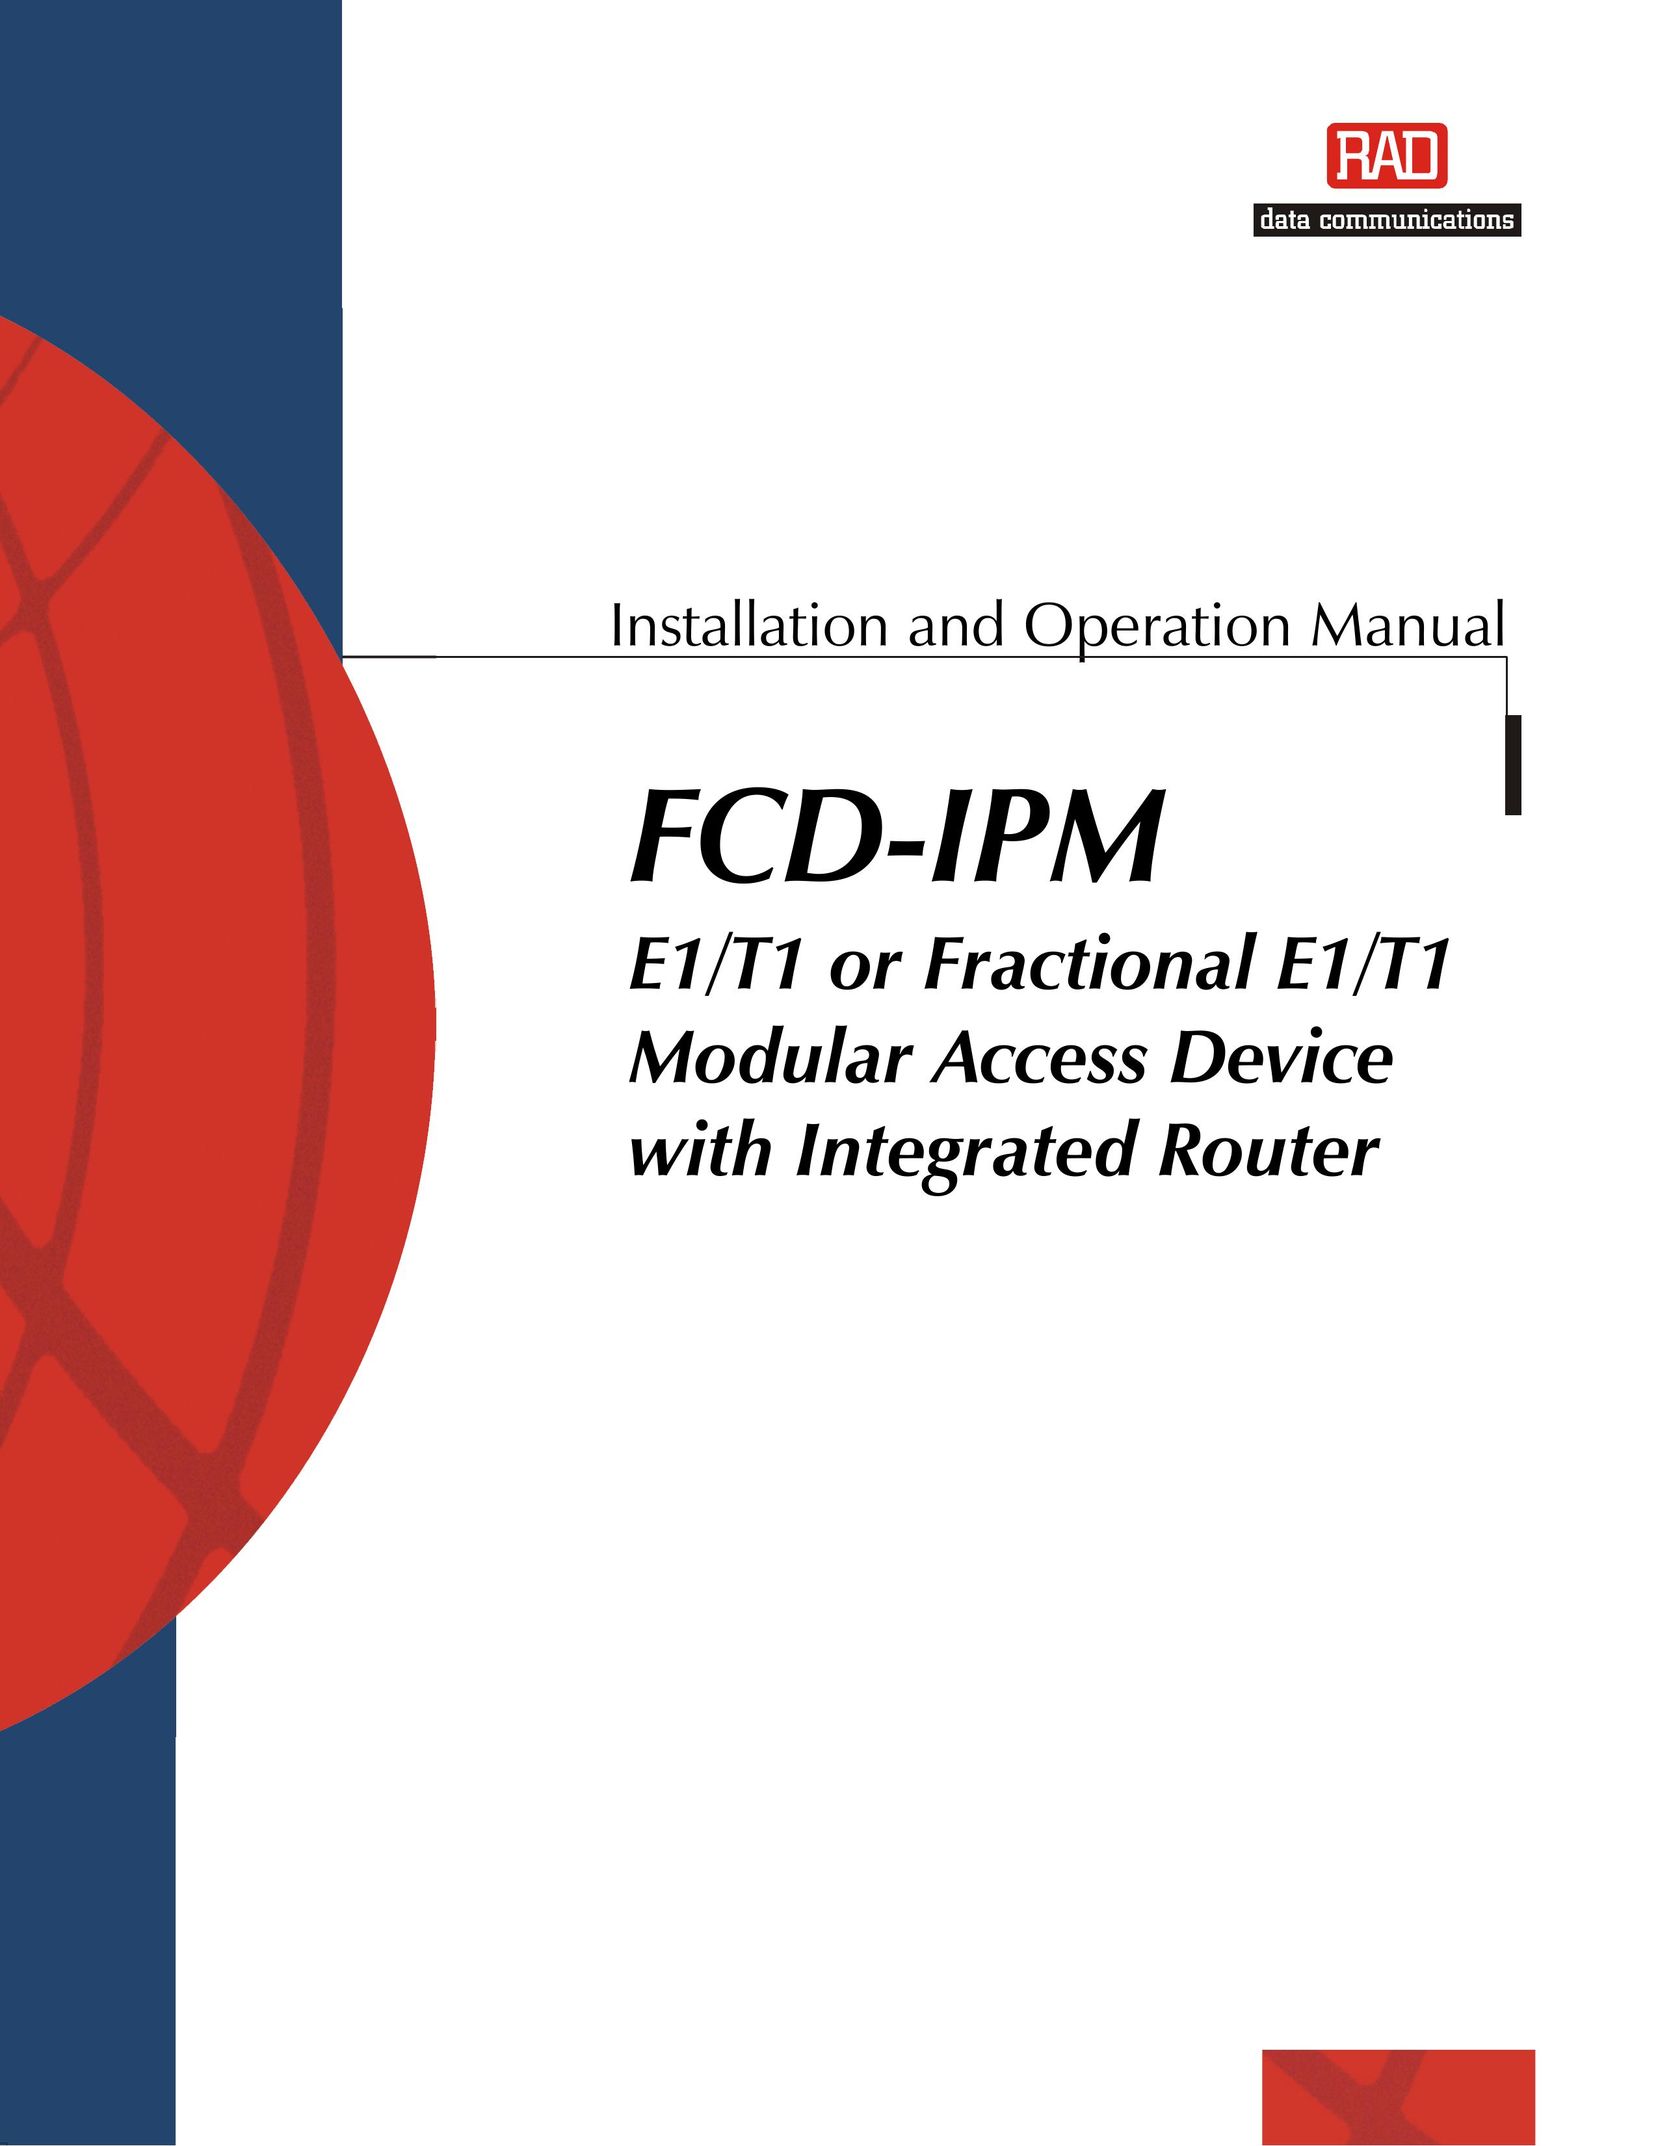 RAD Data comm Modular Access Device with Integrated Router Network Router User Manual